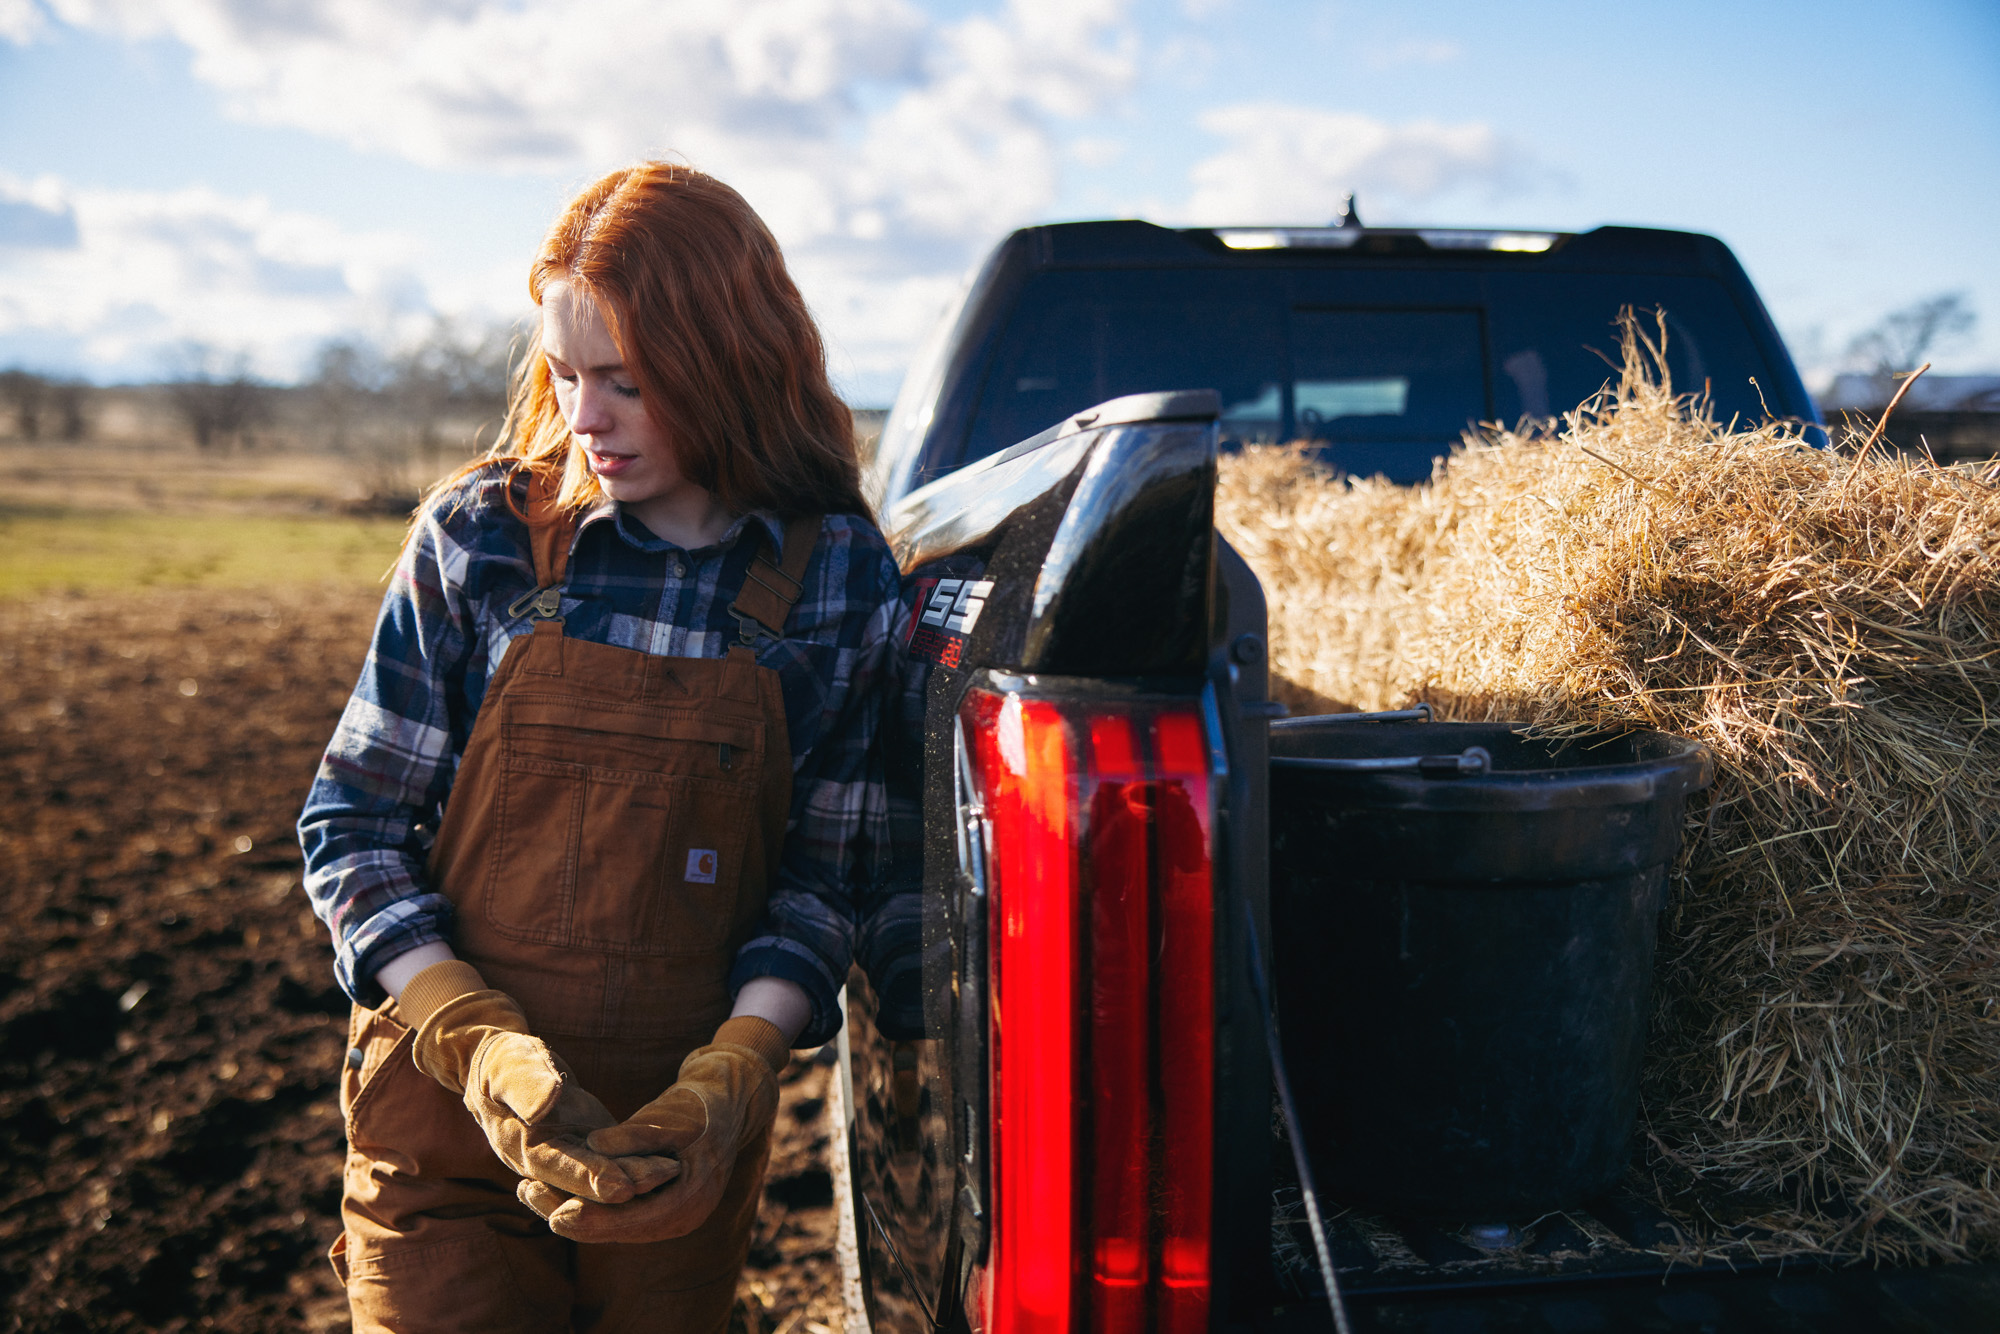 automotive and commercial photographer caleb kuhl photographs the toyota tundra truck as a part of farm life